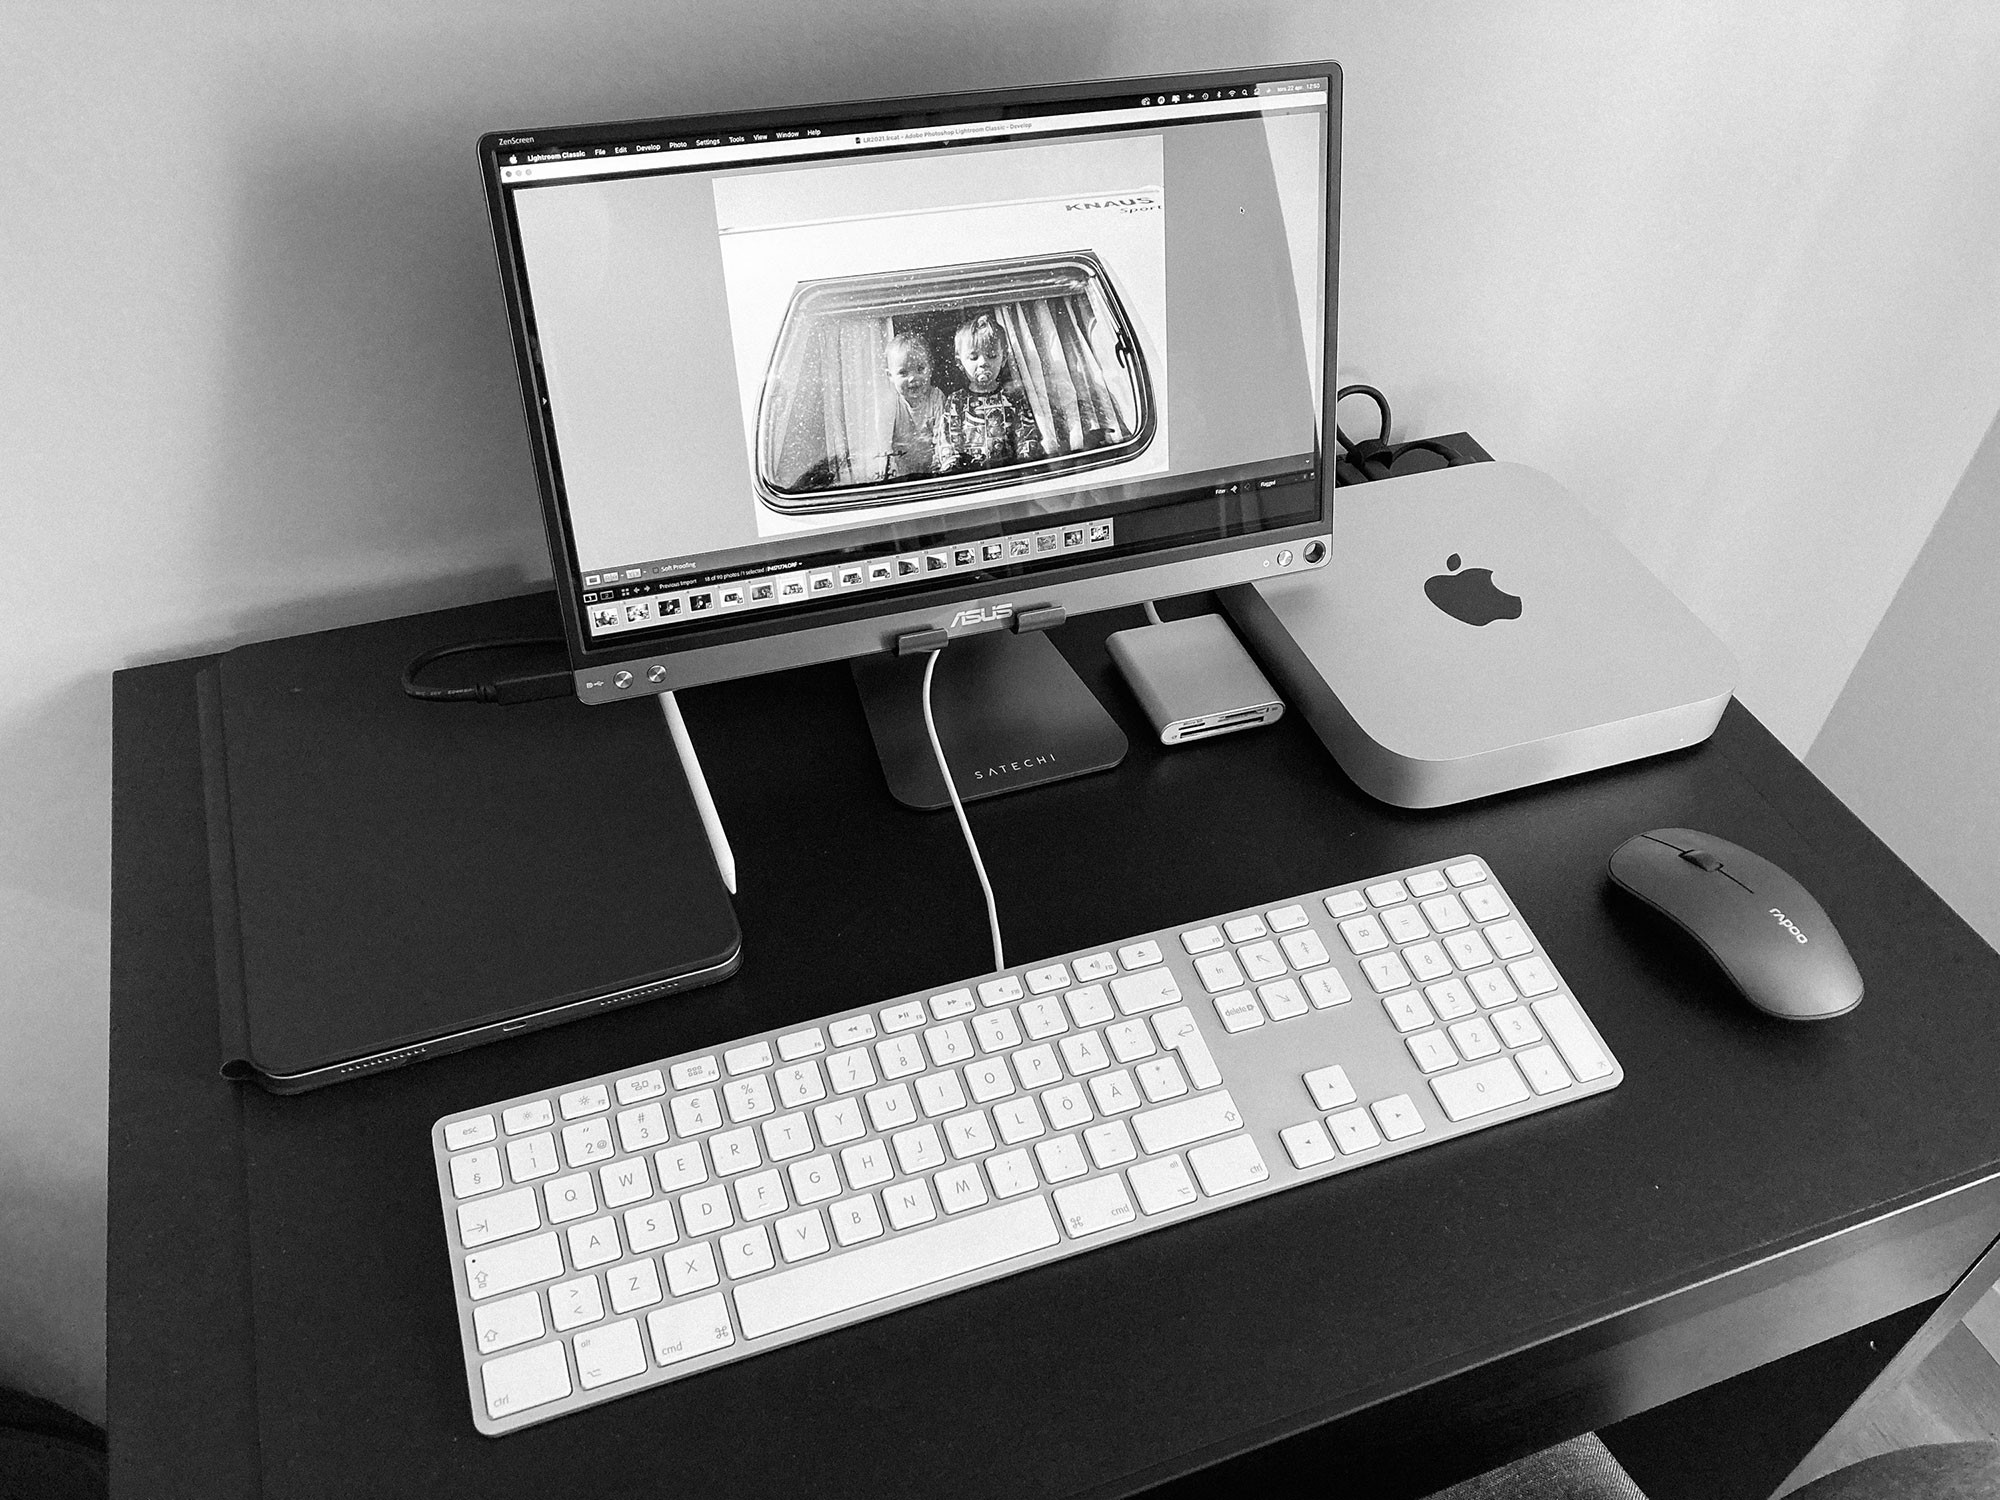 Apple Mac Mini M1 for photographers – A compact but powerful workstation